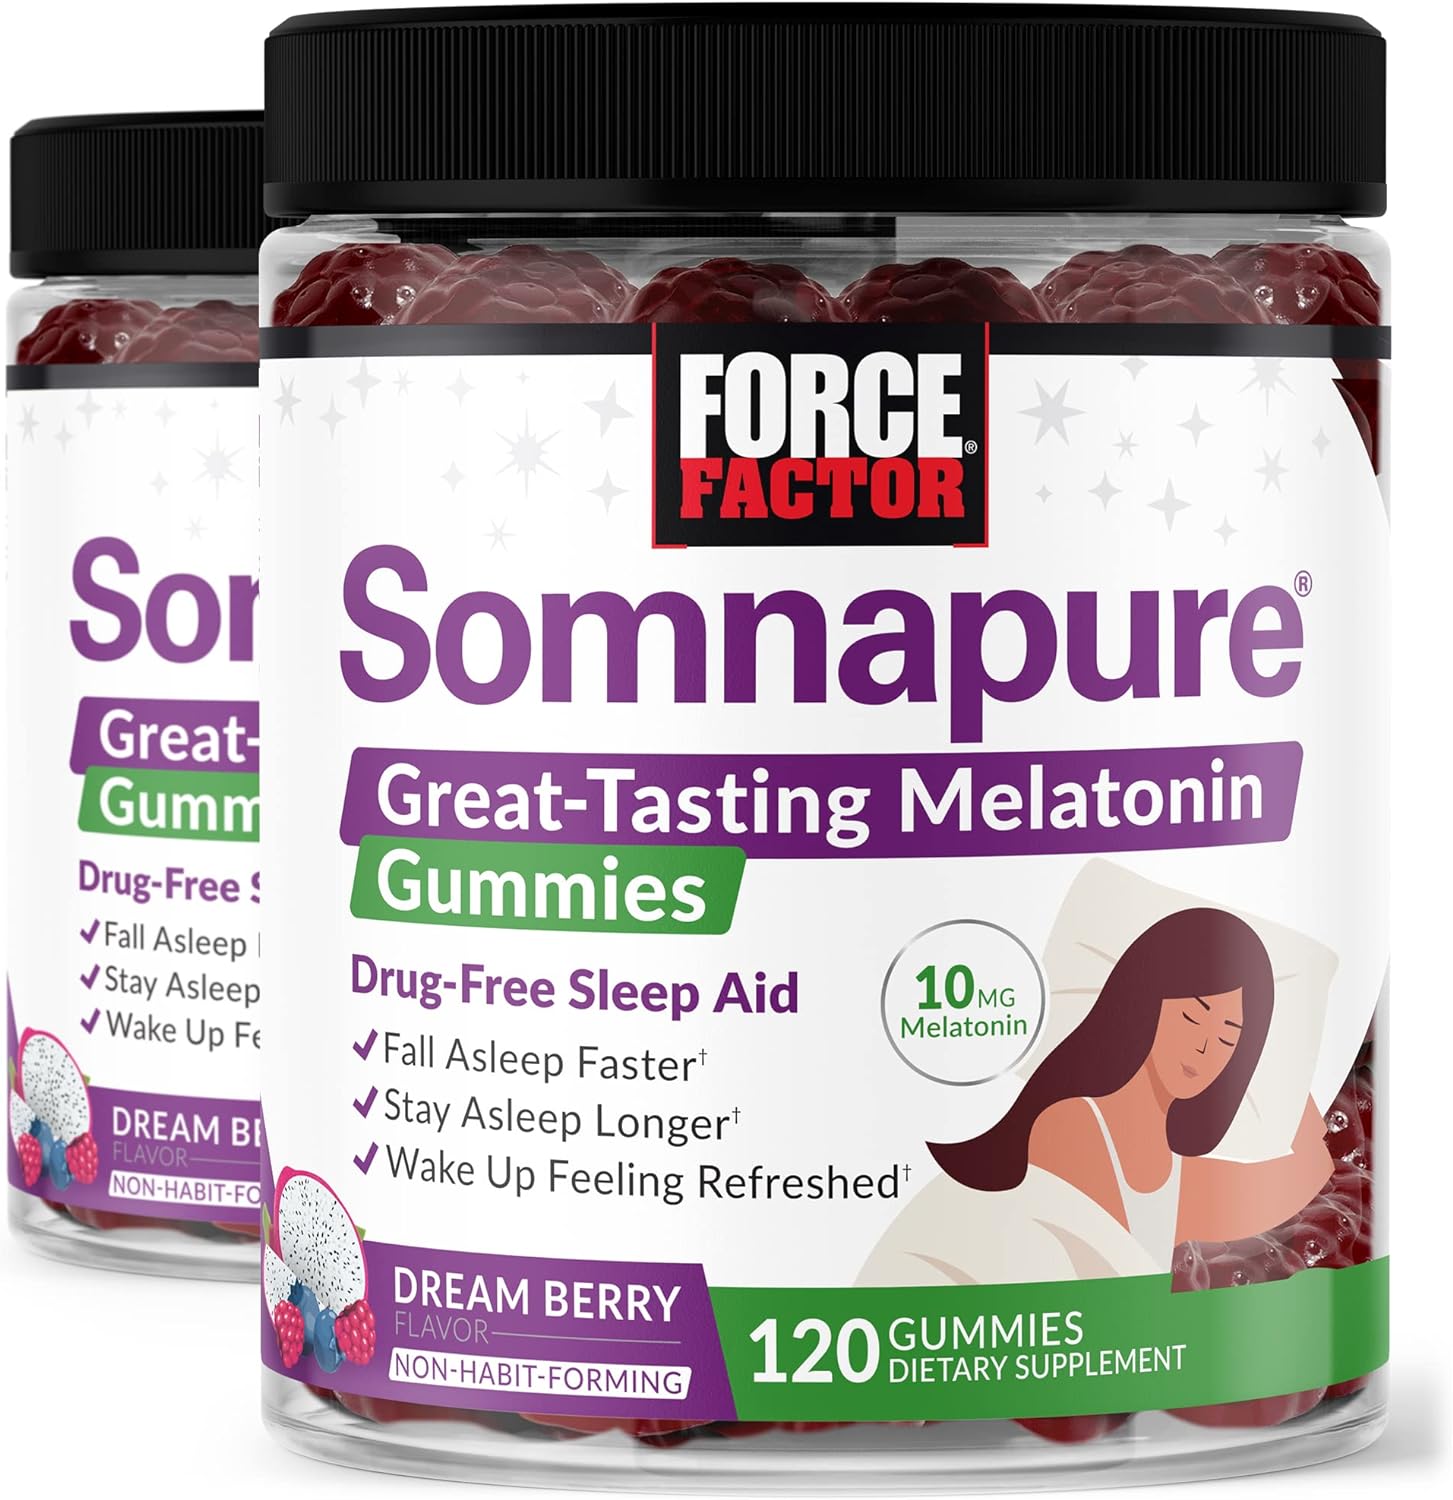 Force Factor Somnapure Gummies with Melatonin, Drug-Free Sleep Support Supplement for Adults with Occasional Sleeplessness, Dream Berry Flavor, 120 Count (Pack of 2)